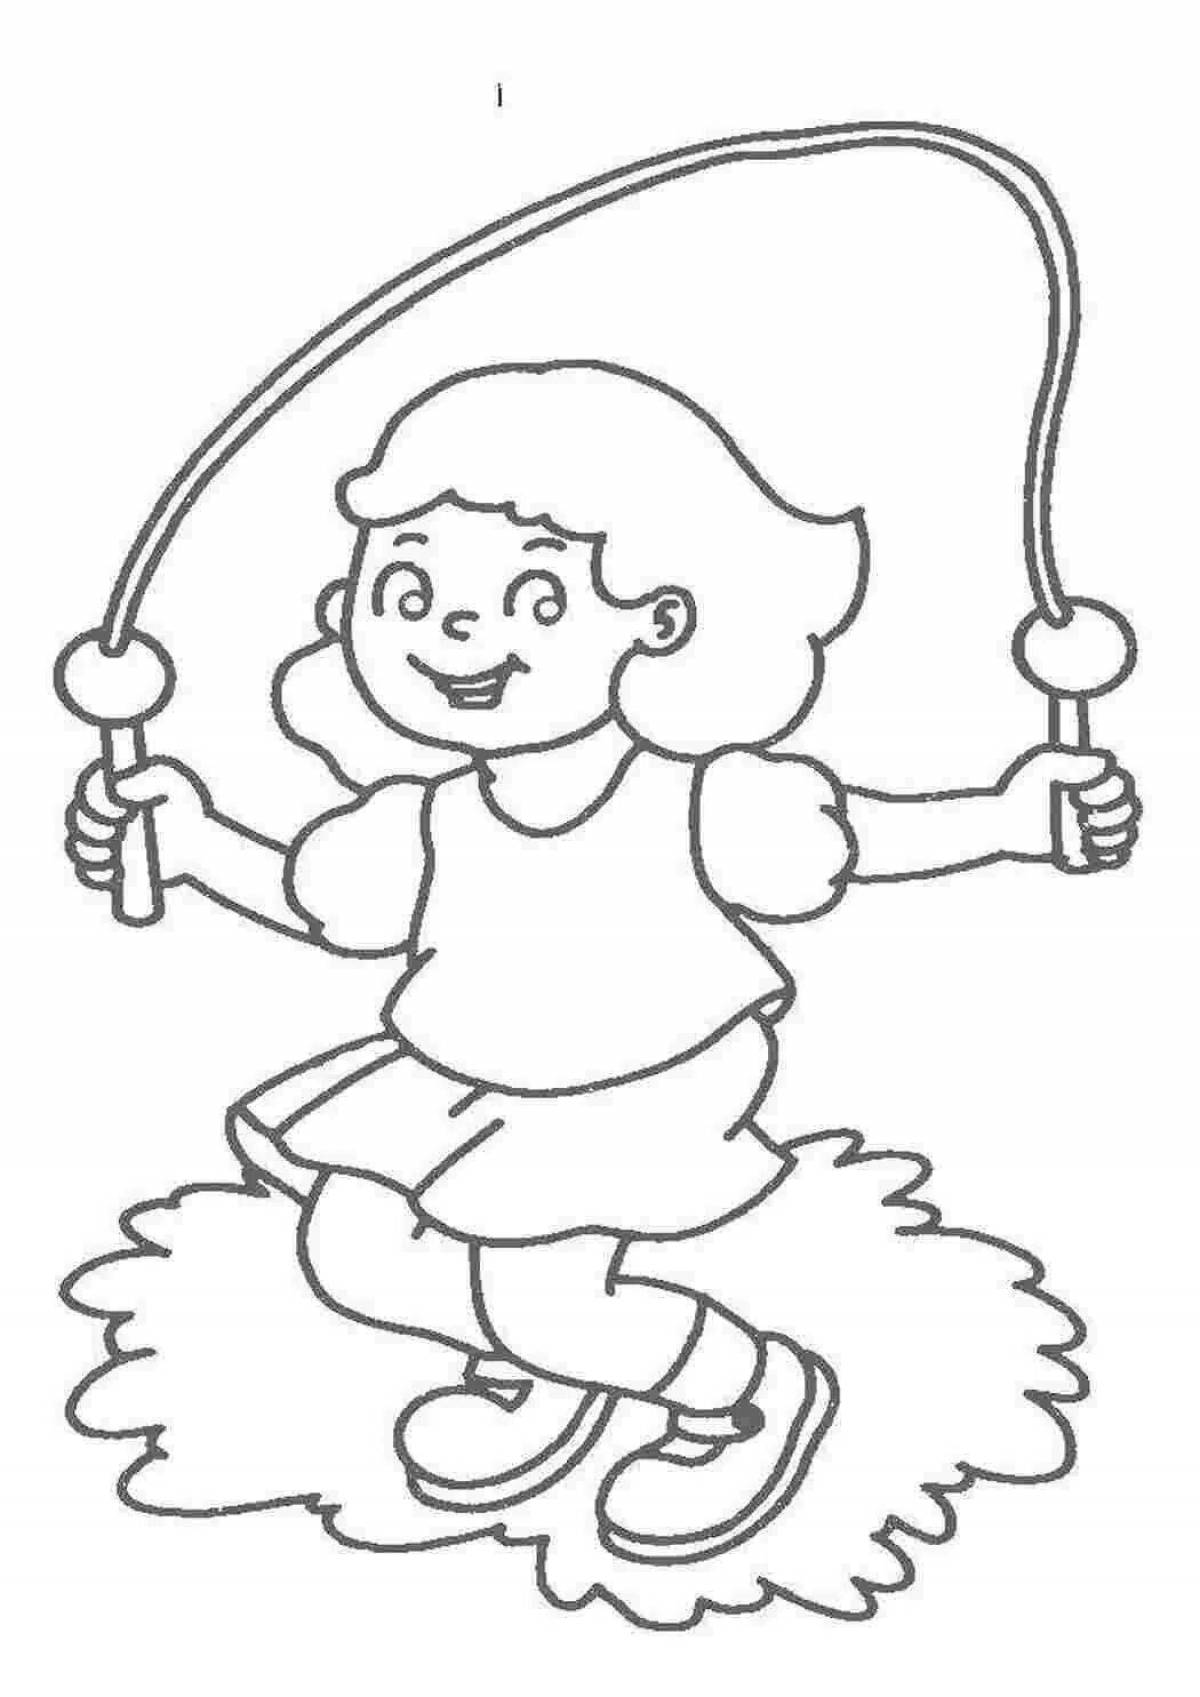 Coloring page funny jump